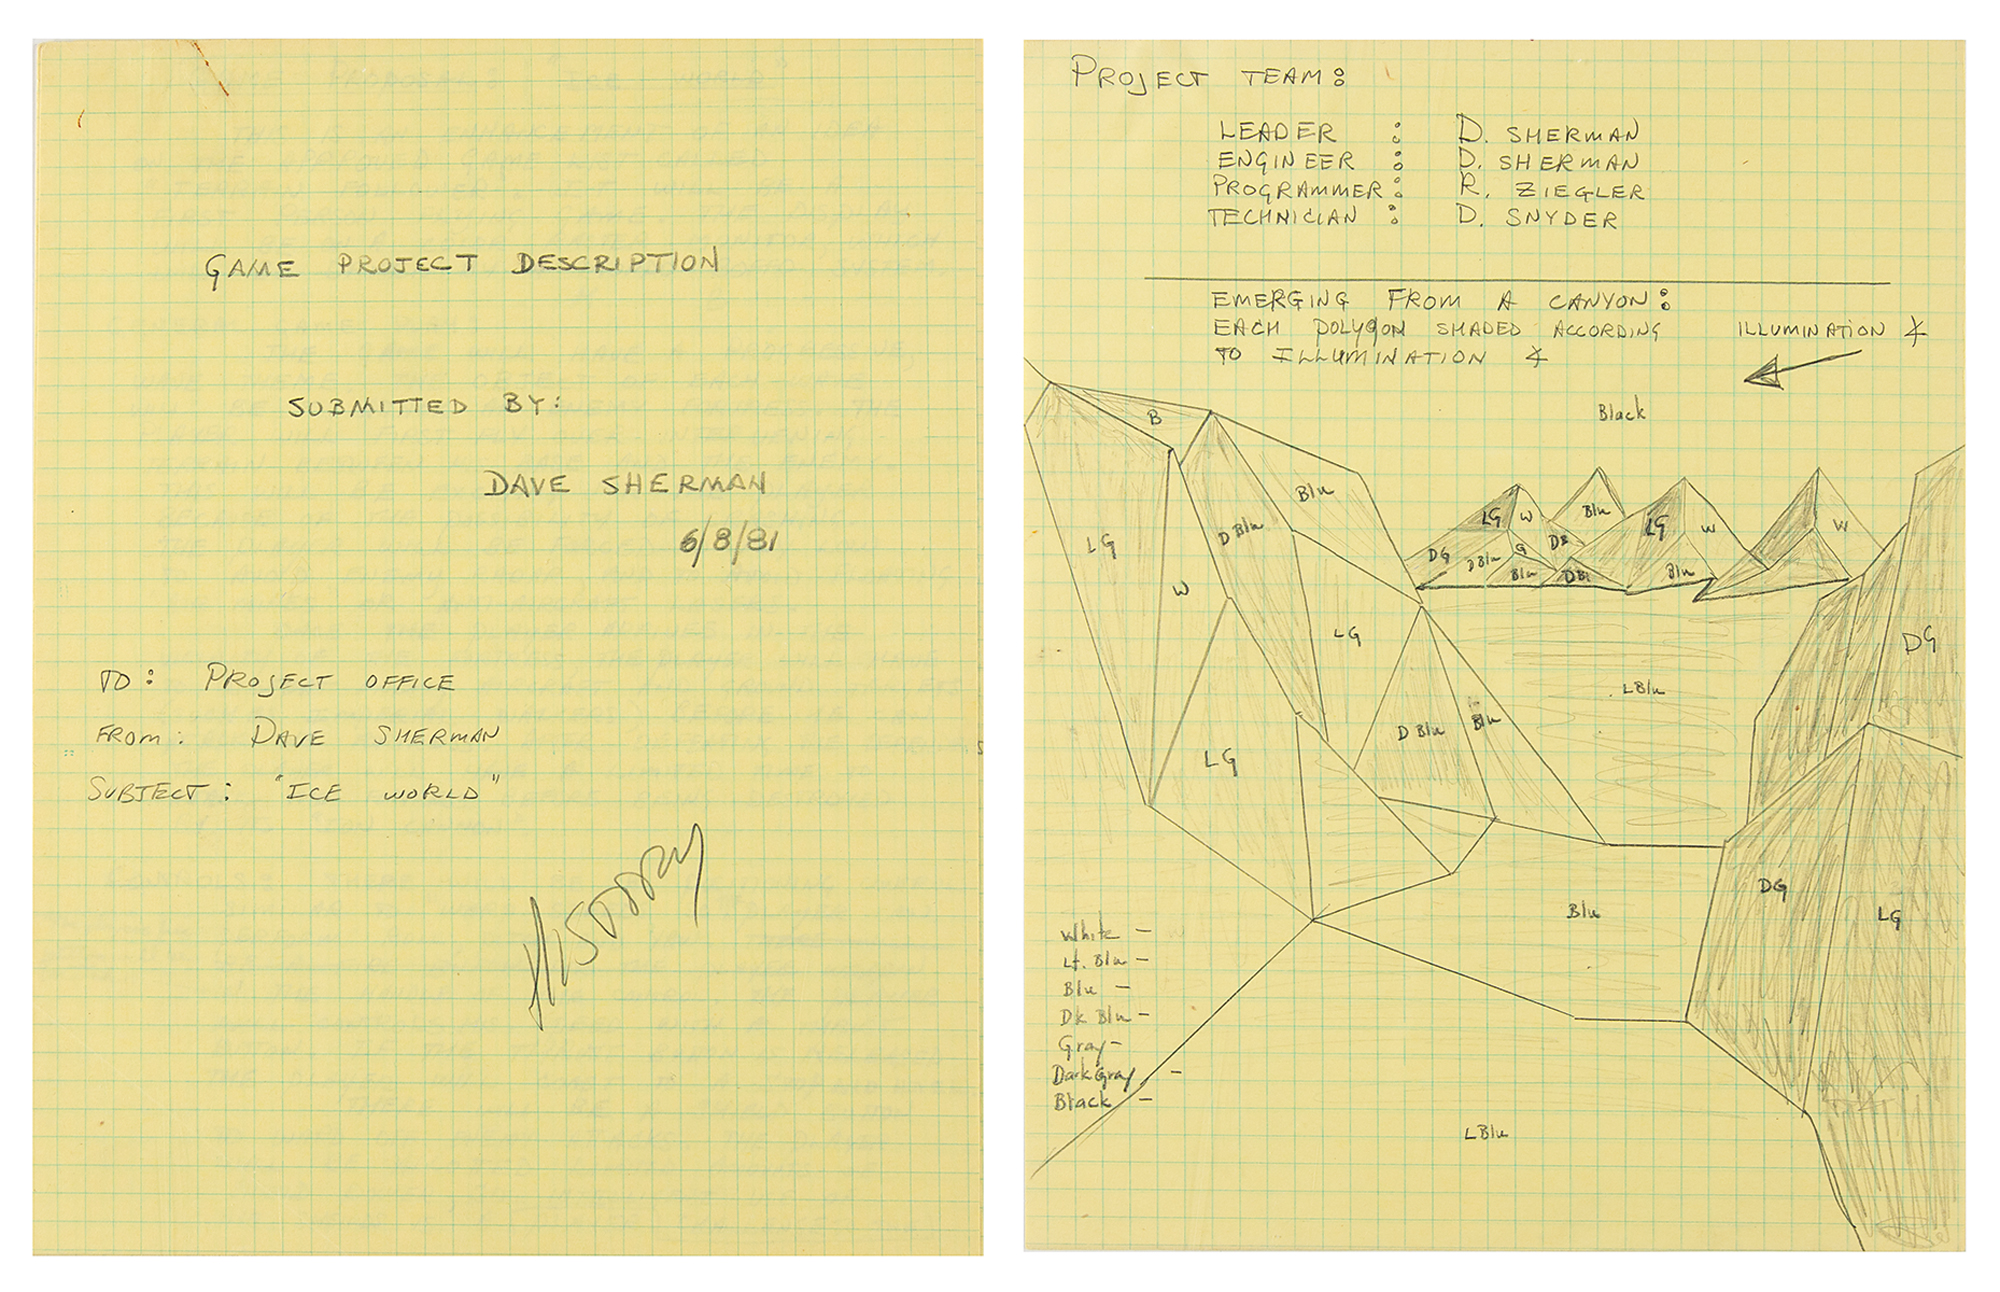 Lot #315 Atari 'I, Robot' Project Document Archive from the collection of David Sherman